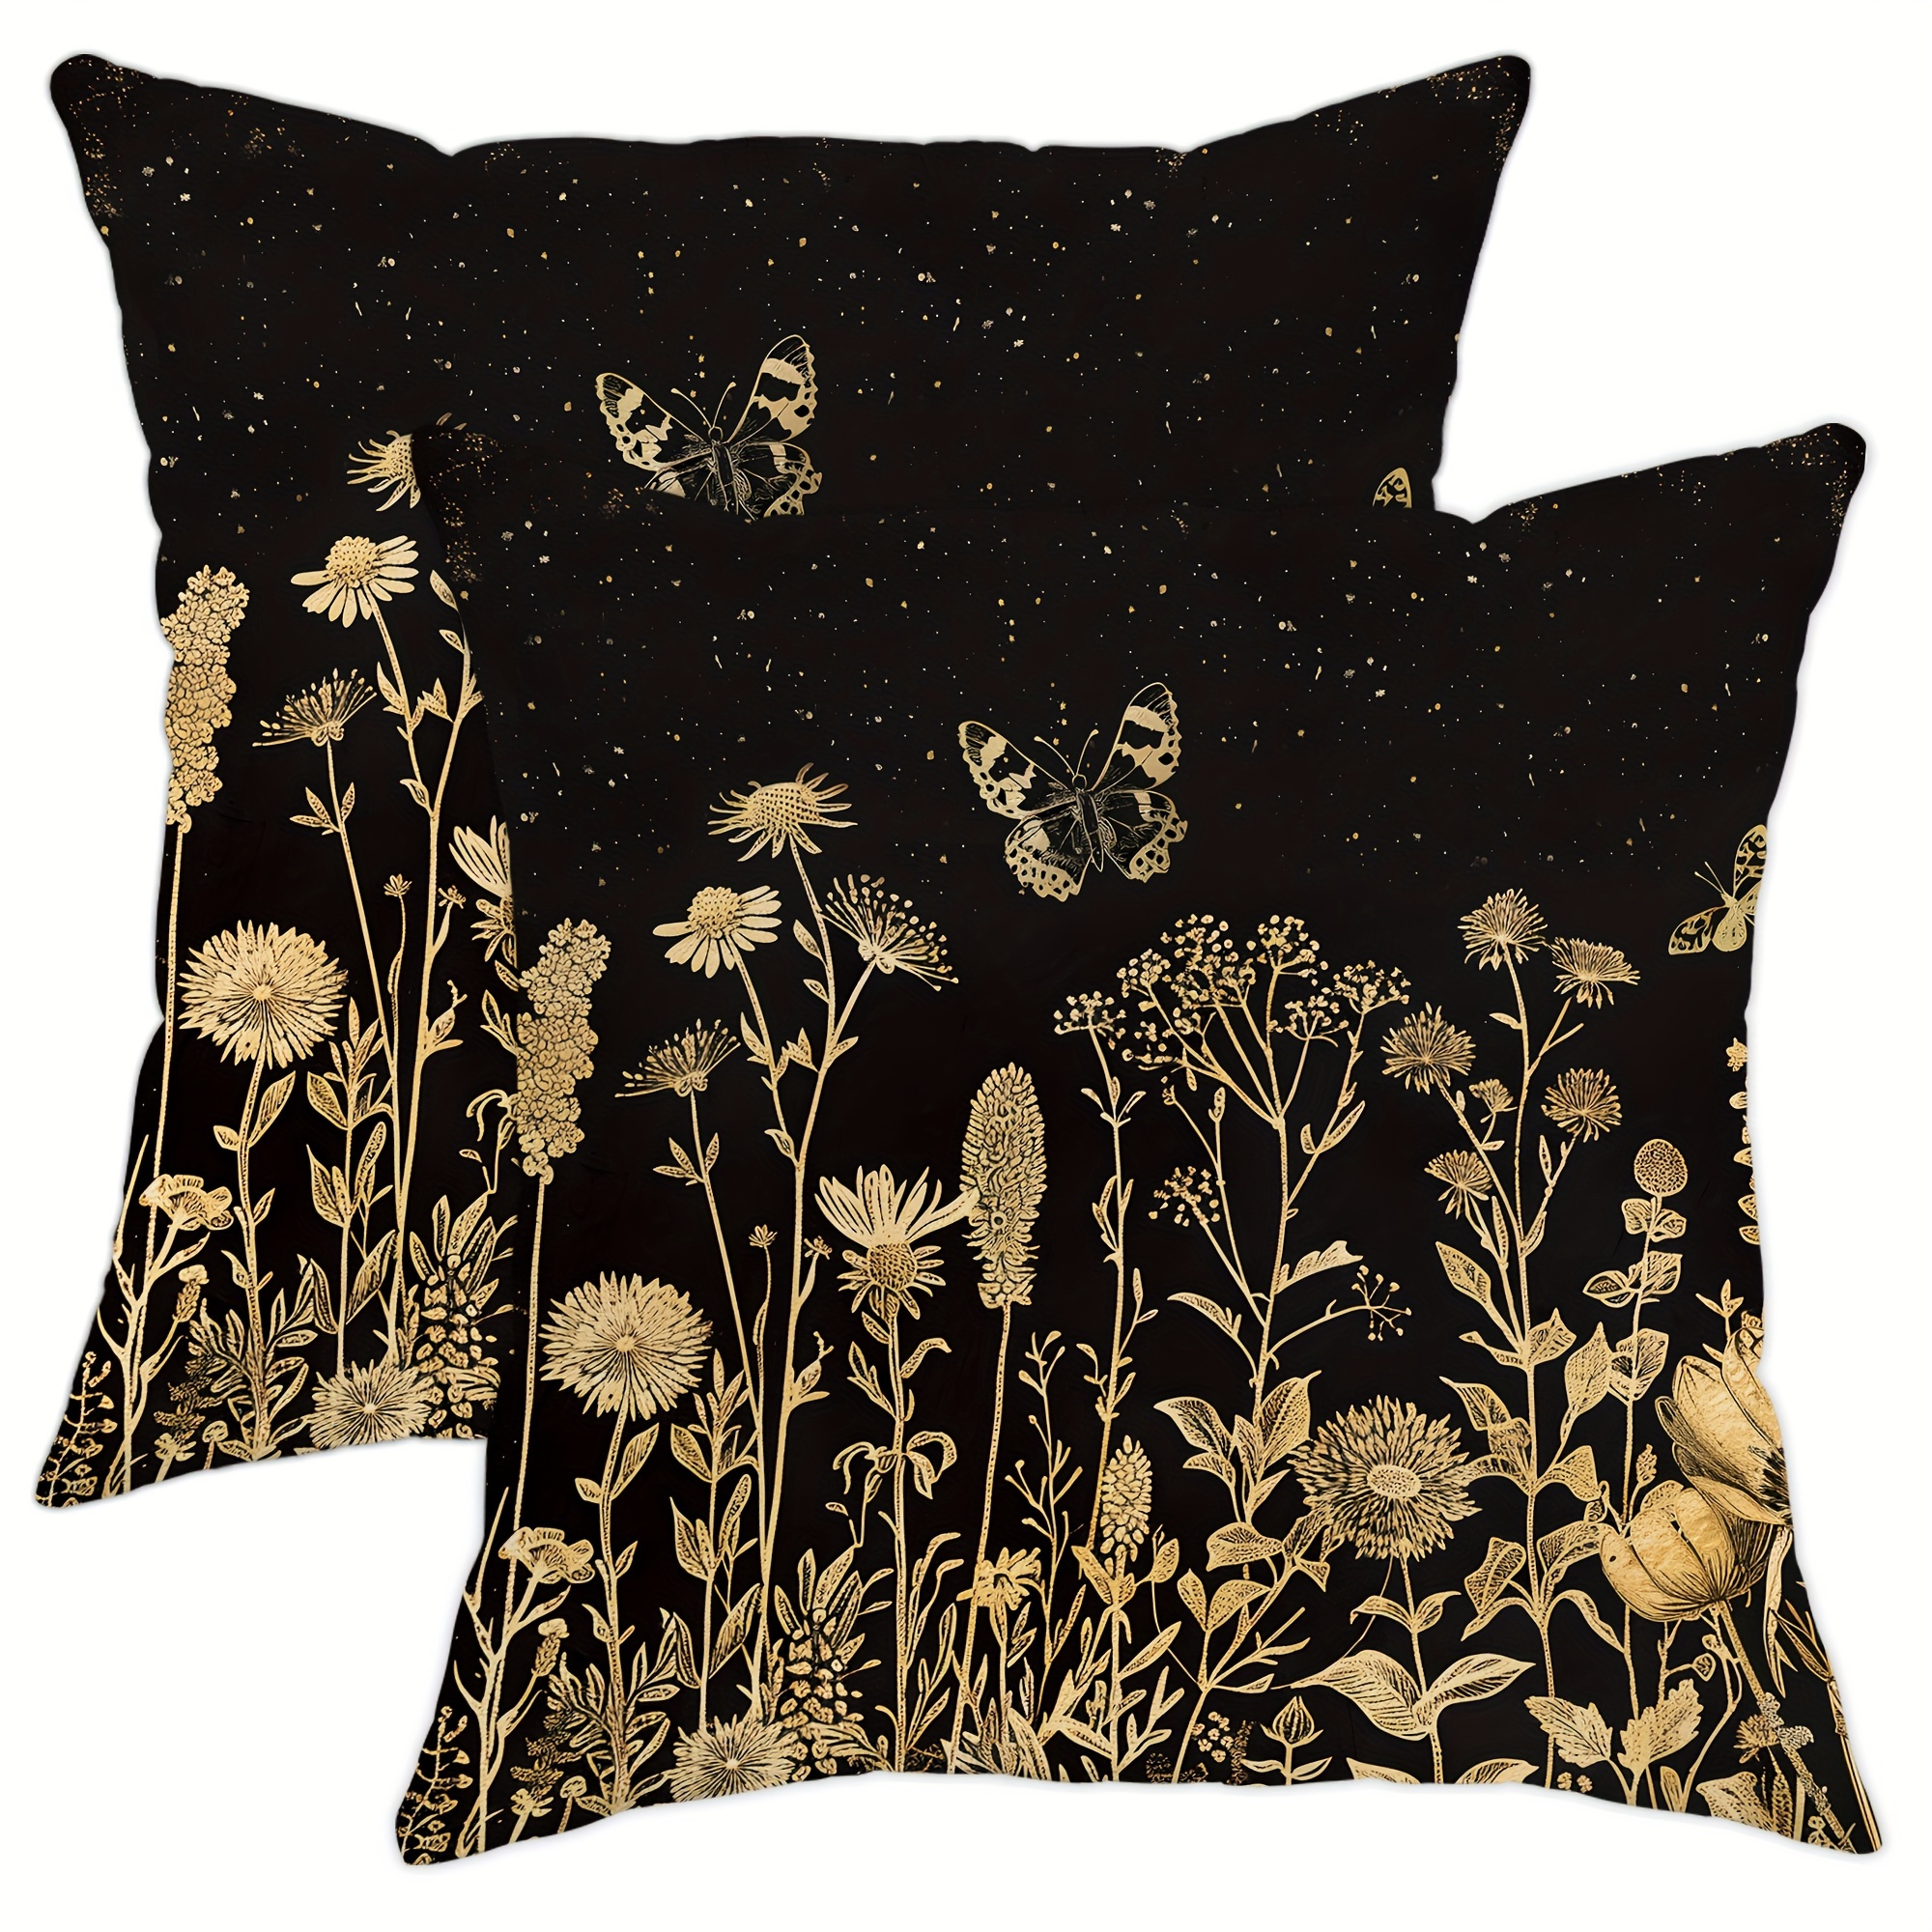 

2pcs, Velvet Throw Pillow Covers, Country Rustic Floral Butterfly Black Gold Throw Pillow Covers 18*18inch, For Living Room Bedroom Sofa Bed Decoration